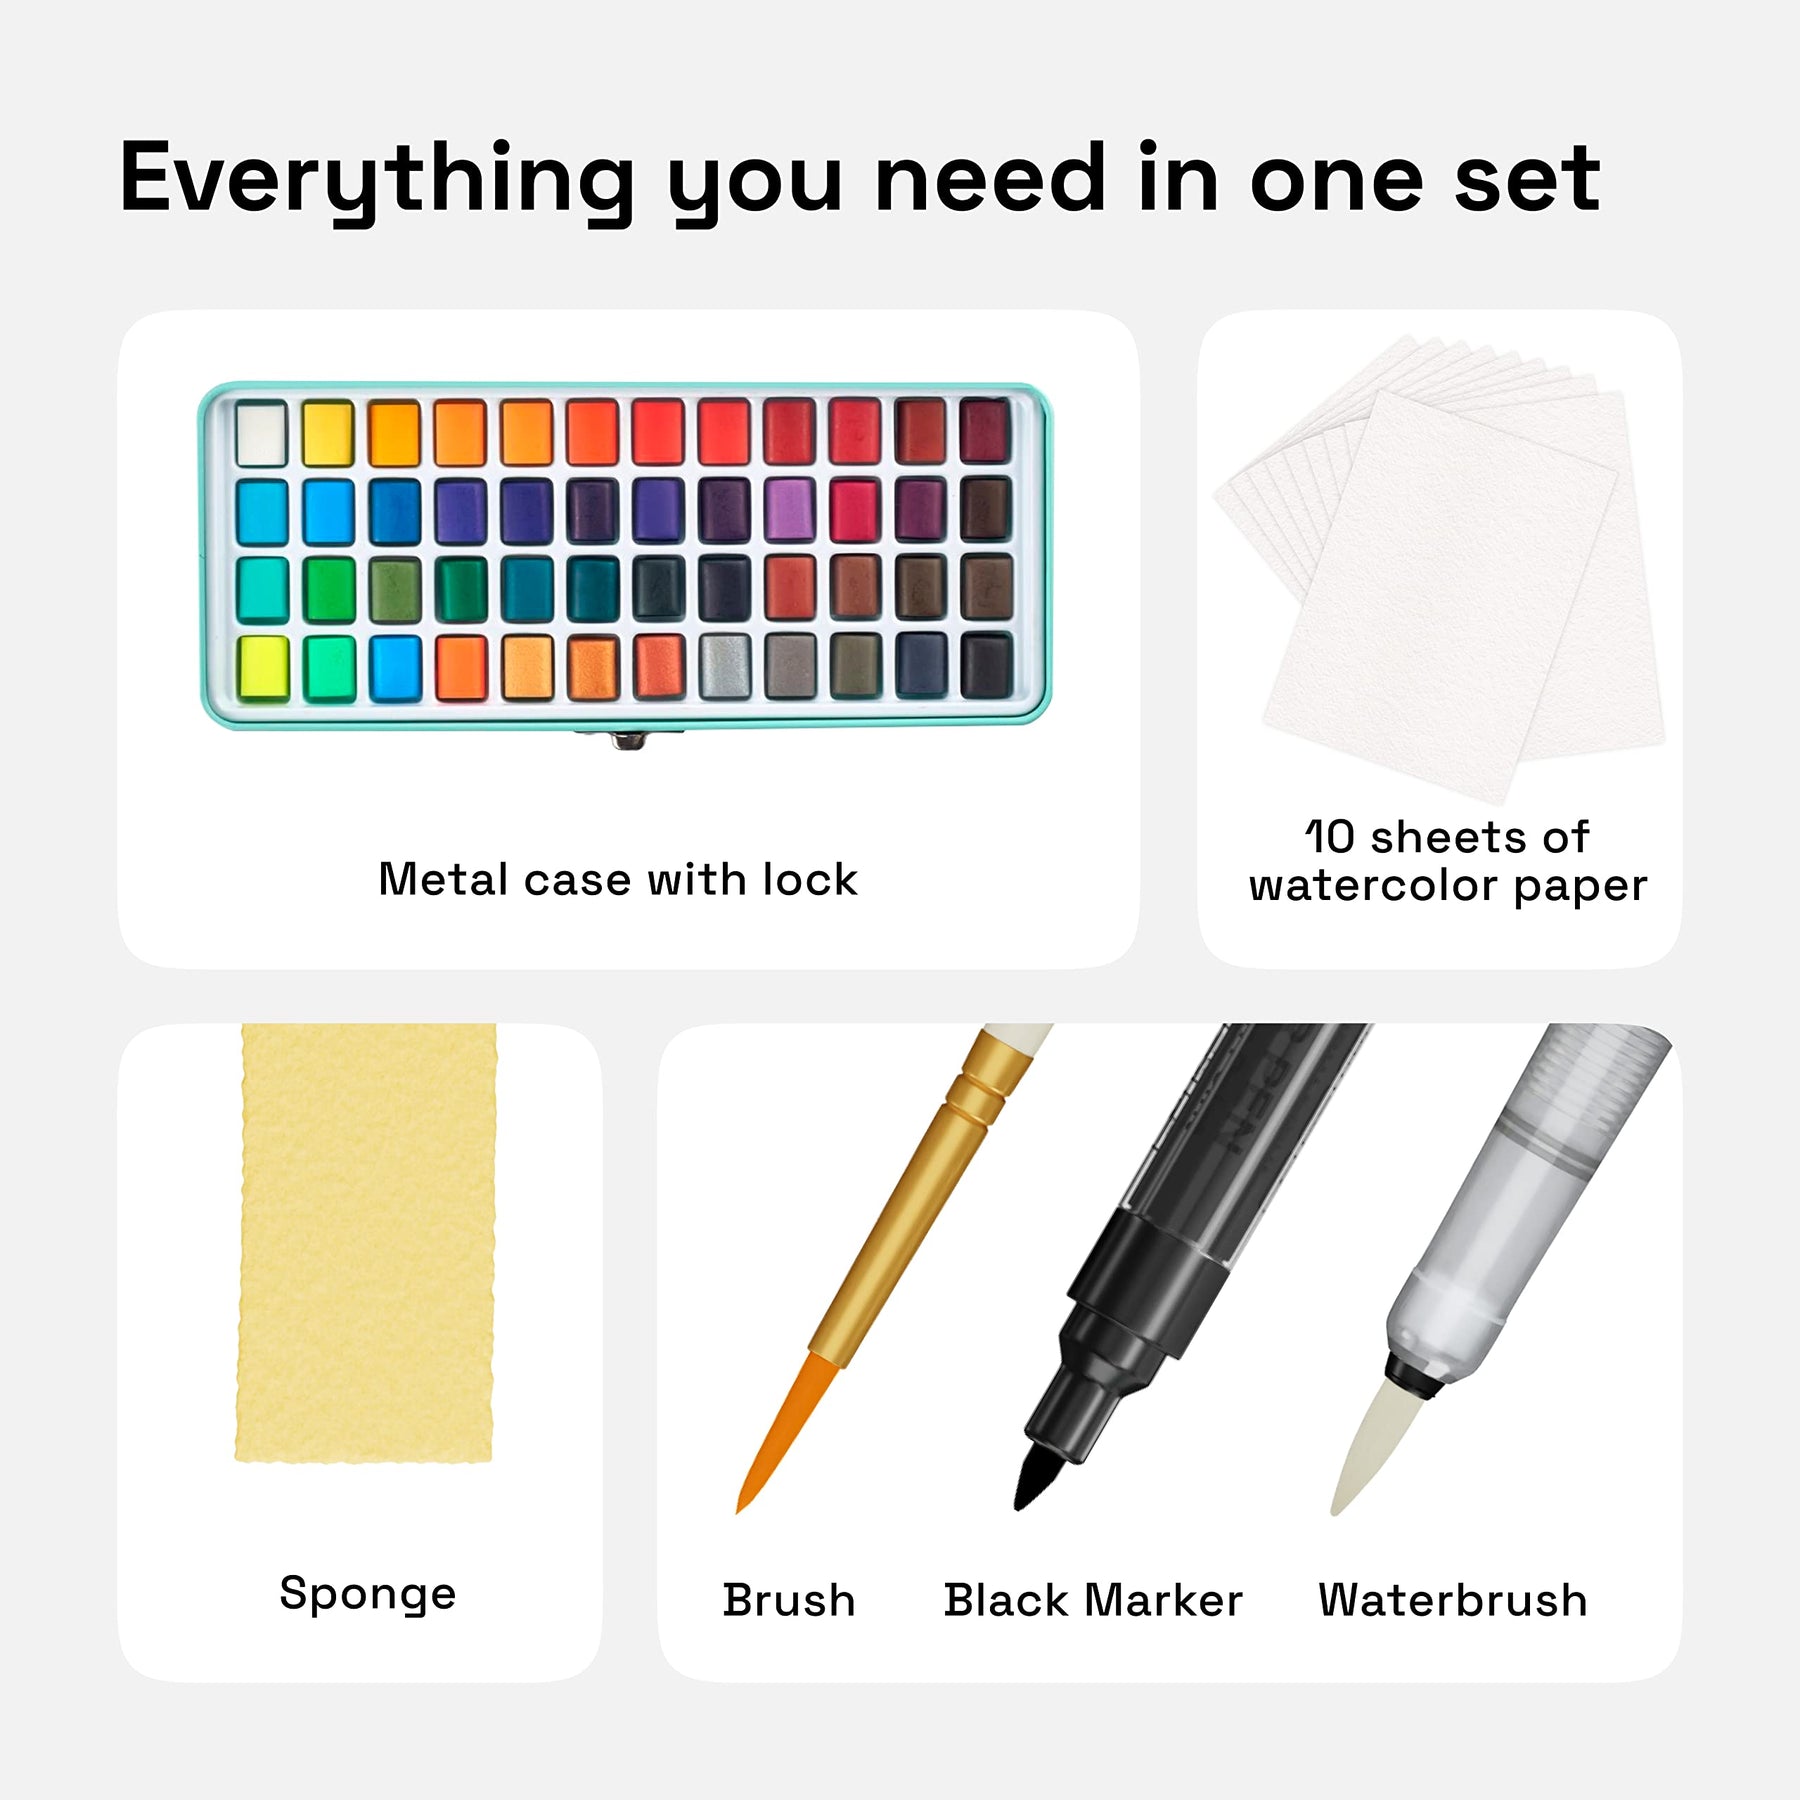 everything you need in one set: metal case, 10 sht of watercolor paper, sponge, brush, waterbrush, black marker